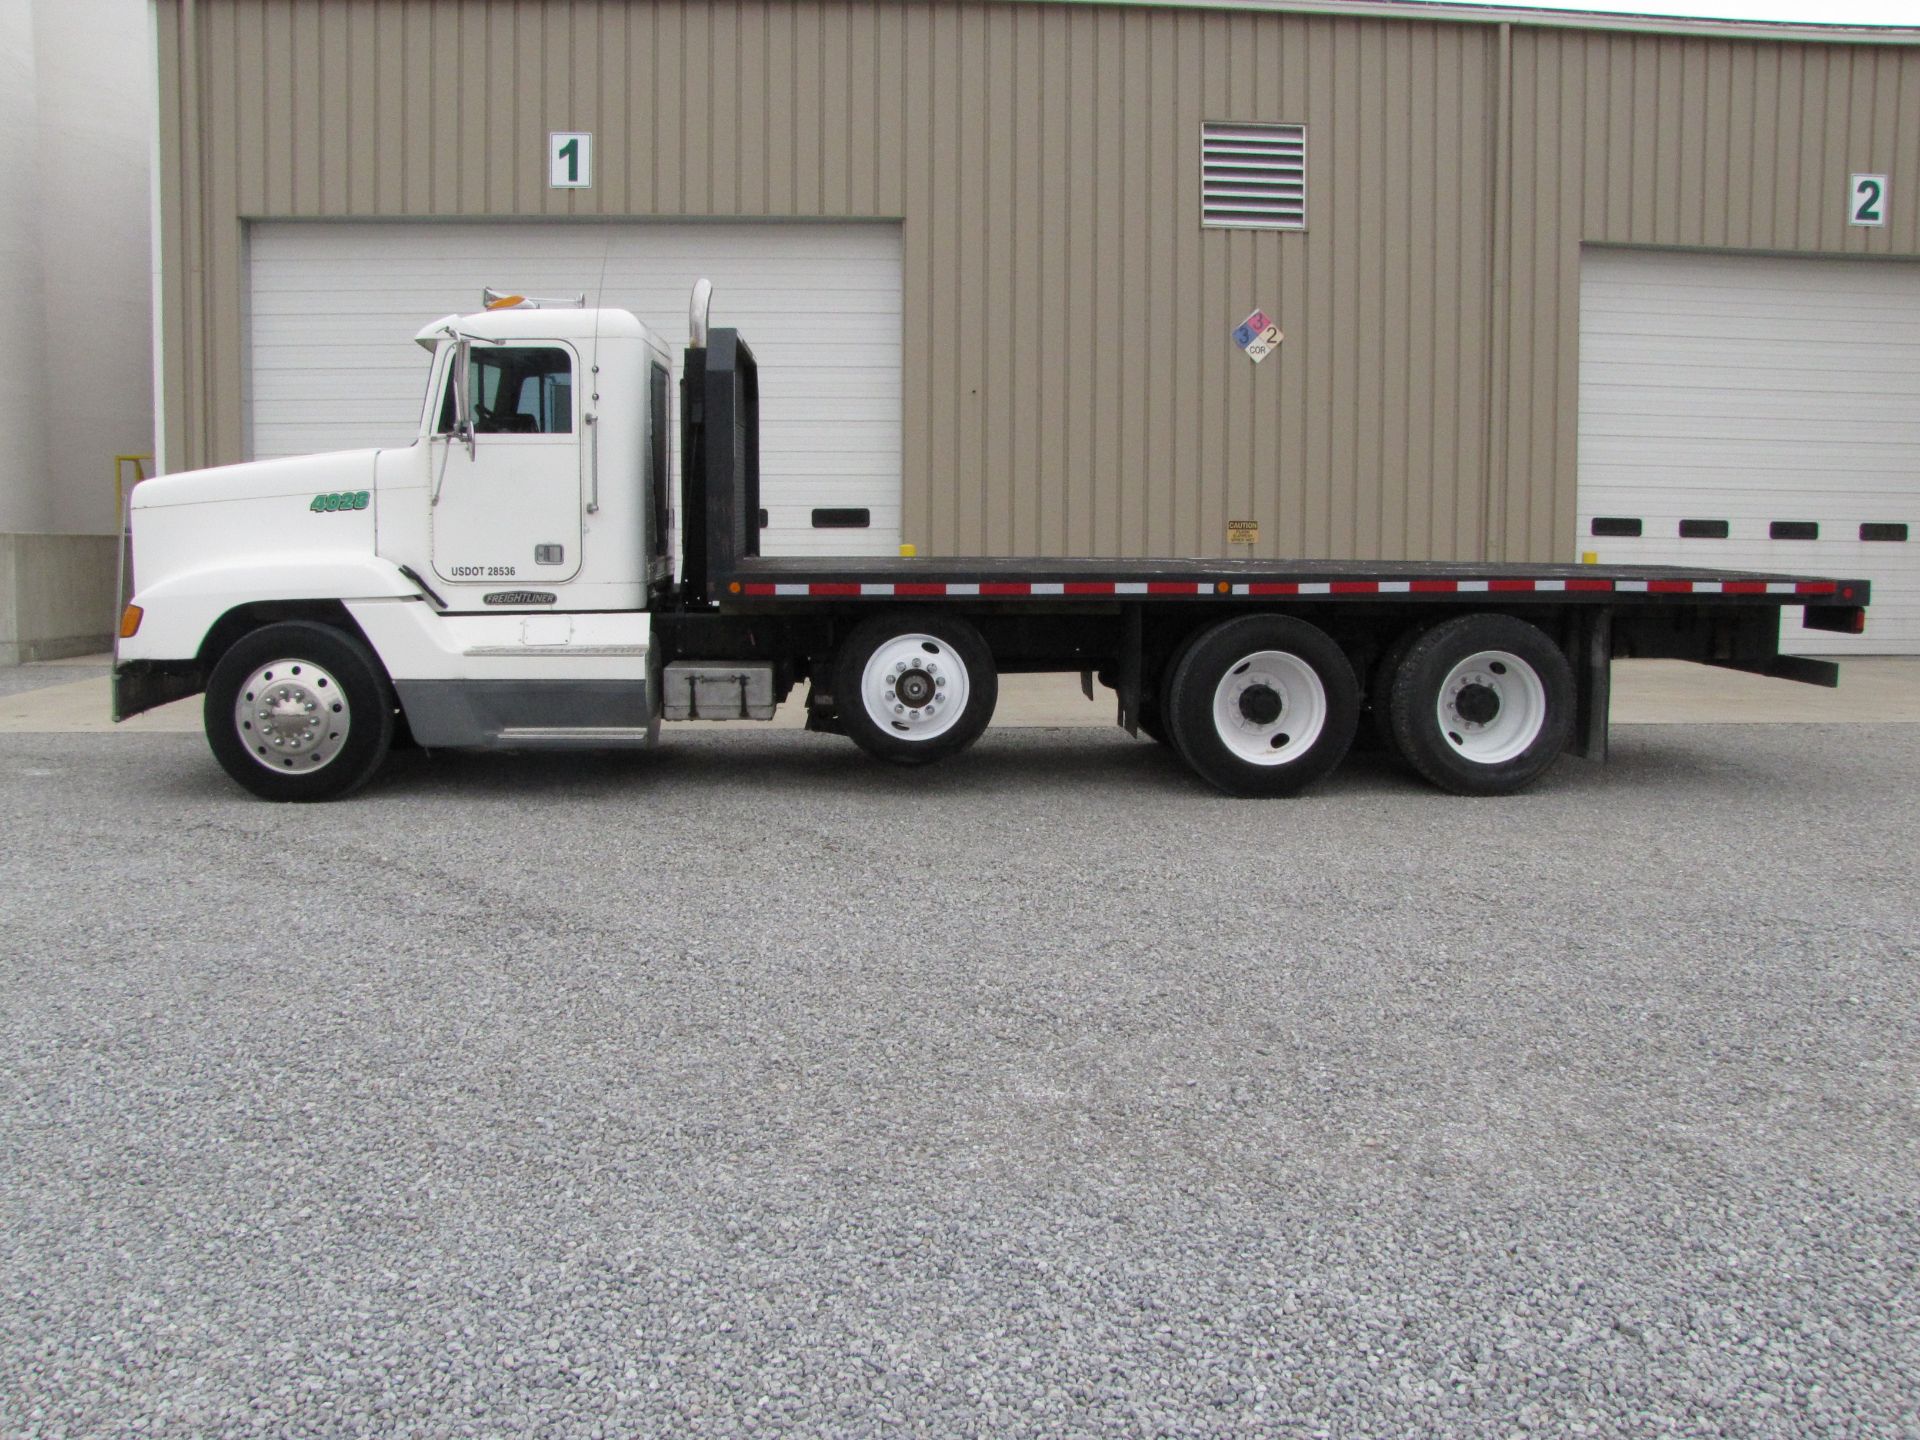 1993 Freightliner FLD120 semi truck - Image 4 of 71